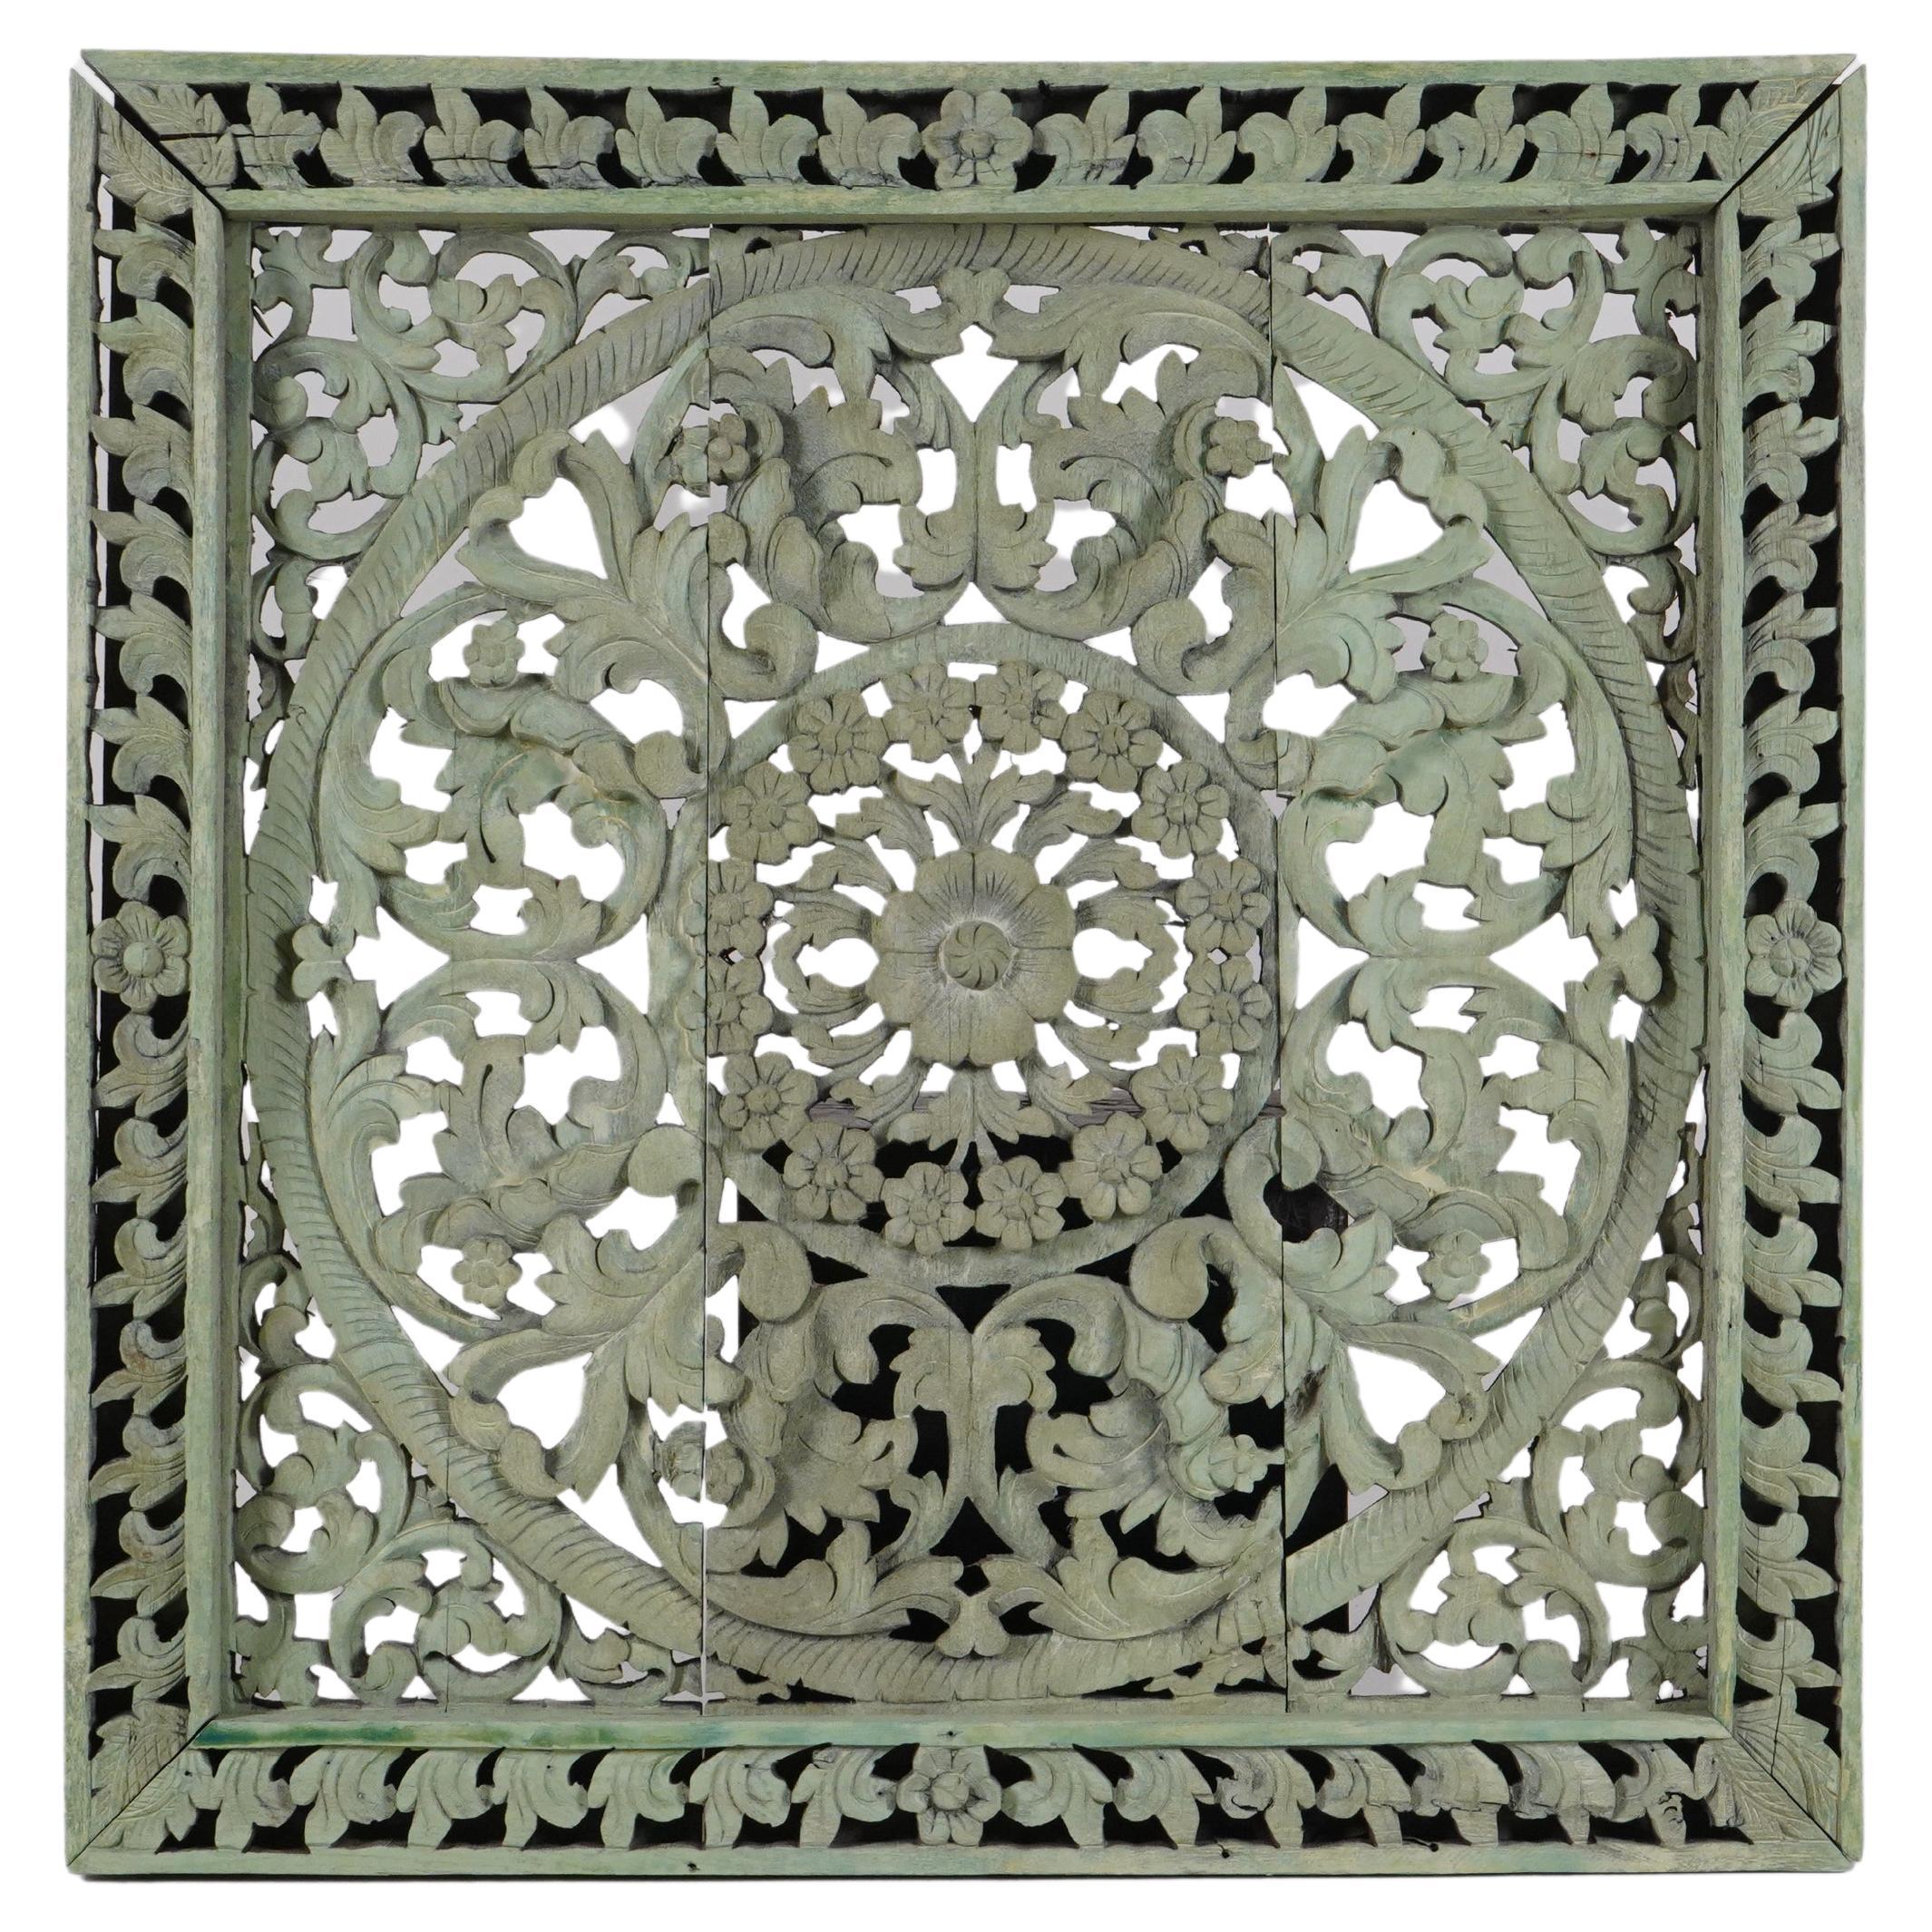 A Carved Teak Wood Lotus Flower Ceiling Panel 3'x3' For Sale